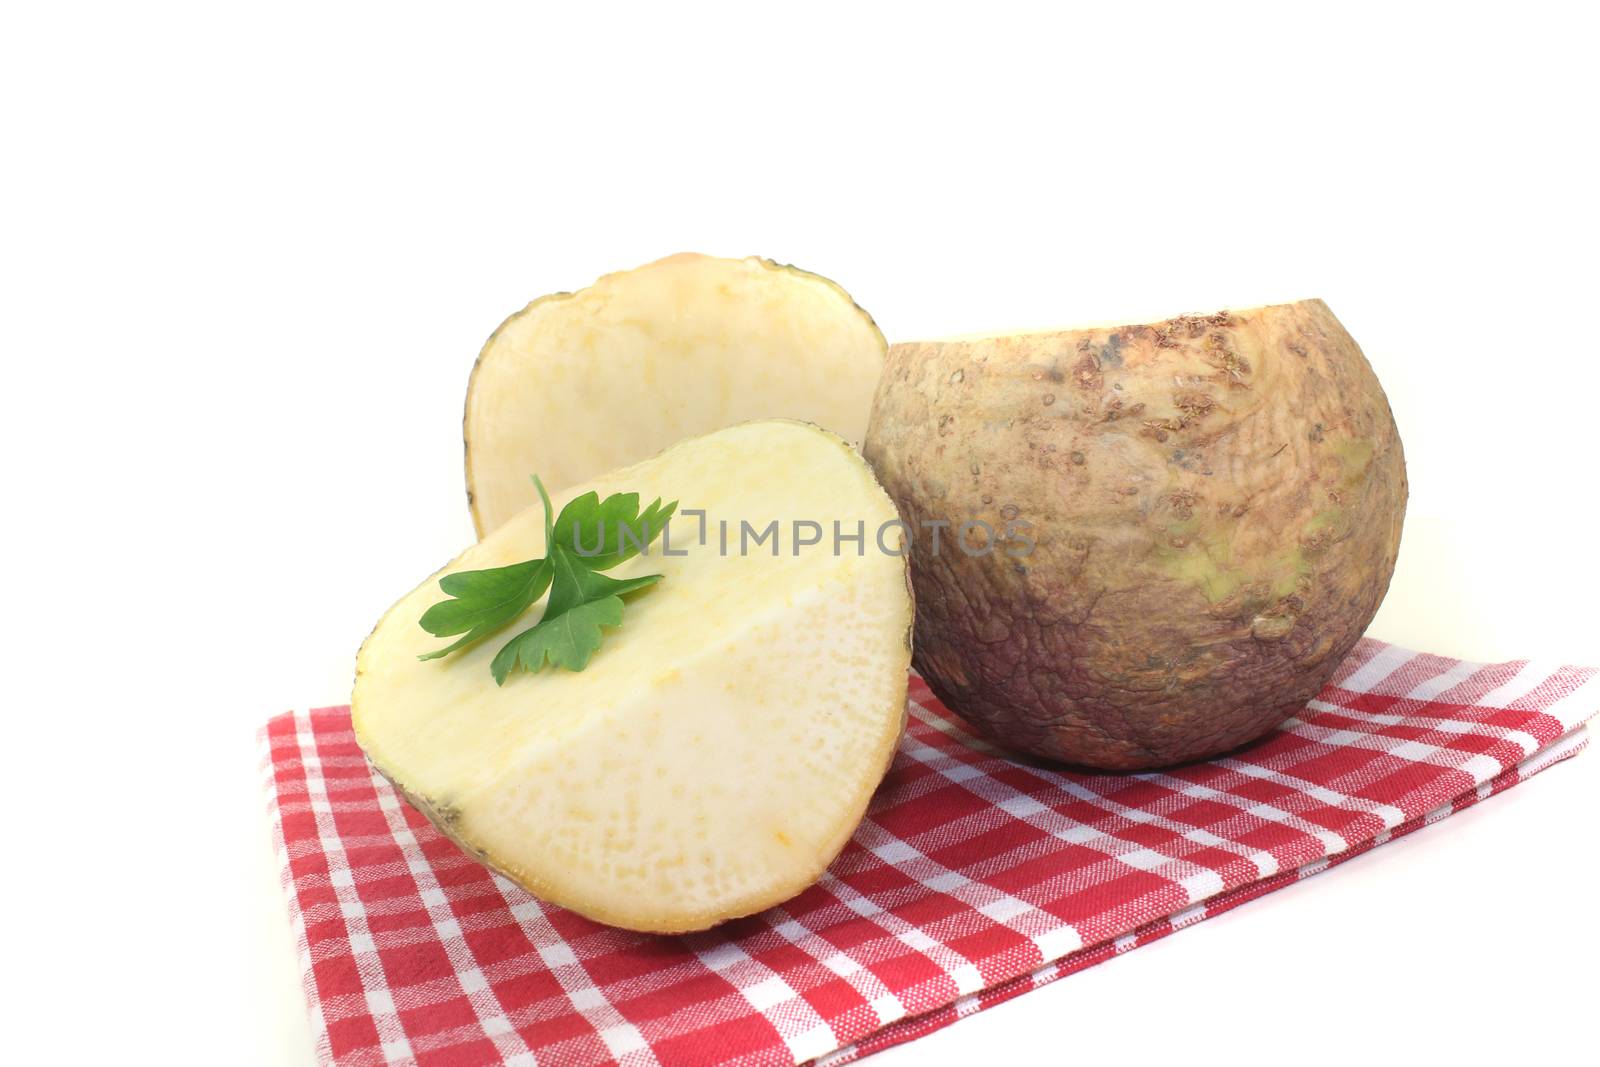 yellow Turnip on a napkin by discovery